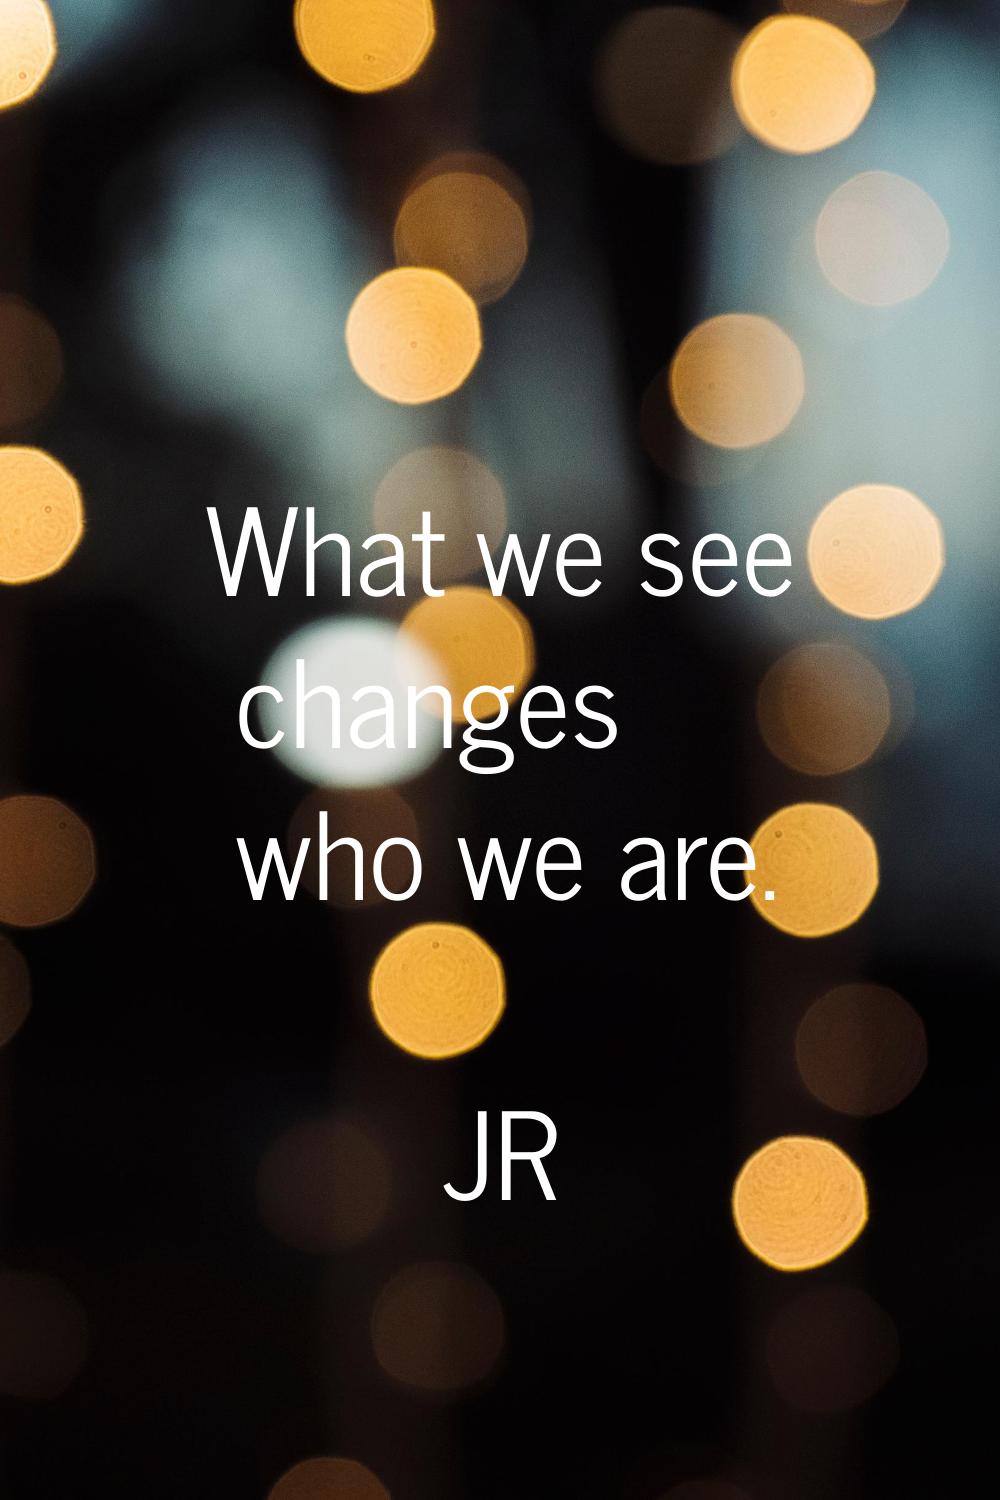 What we see changes who we are.